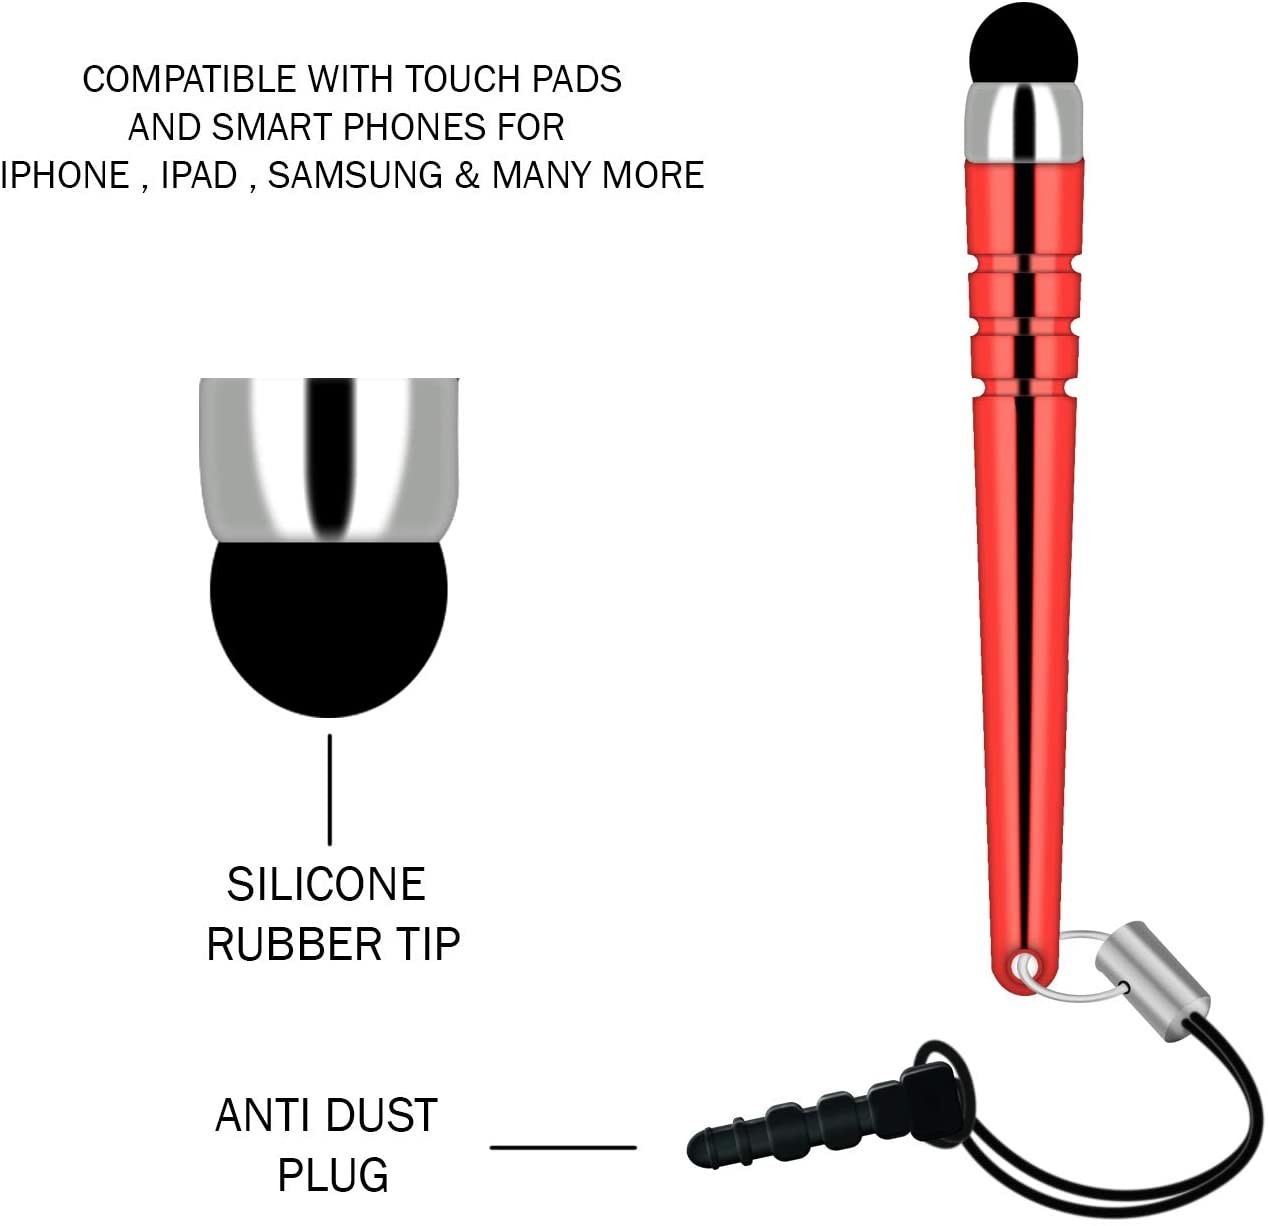 Red Stylus Touch Pen Aluminum Compact - ONY03